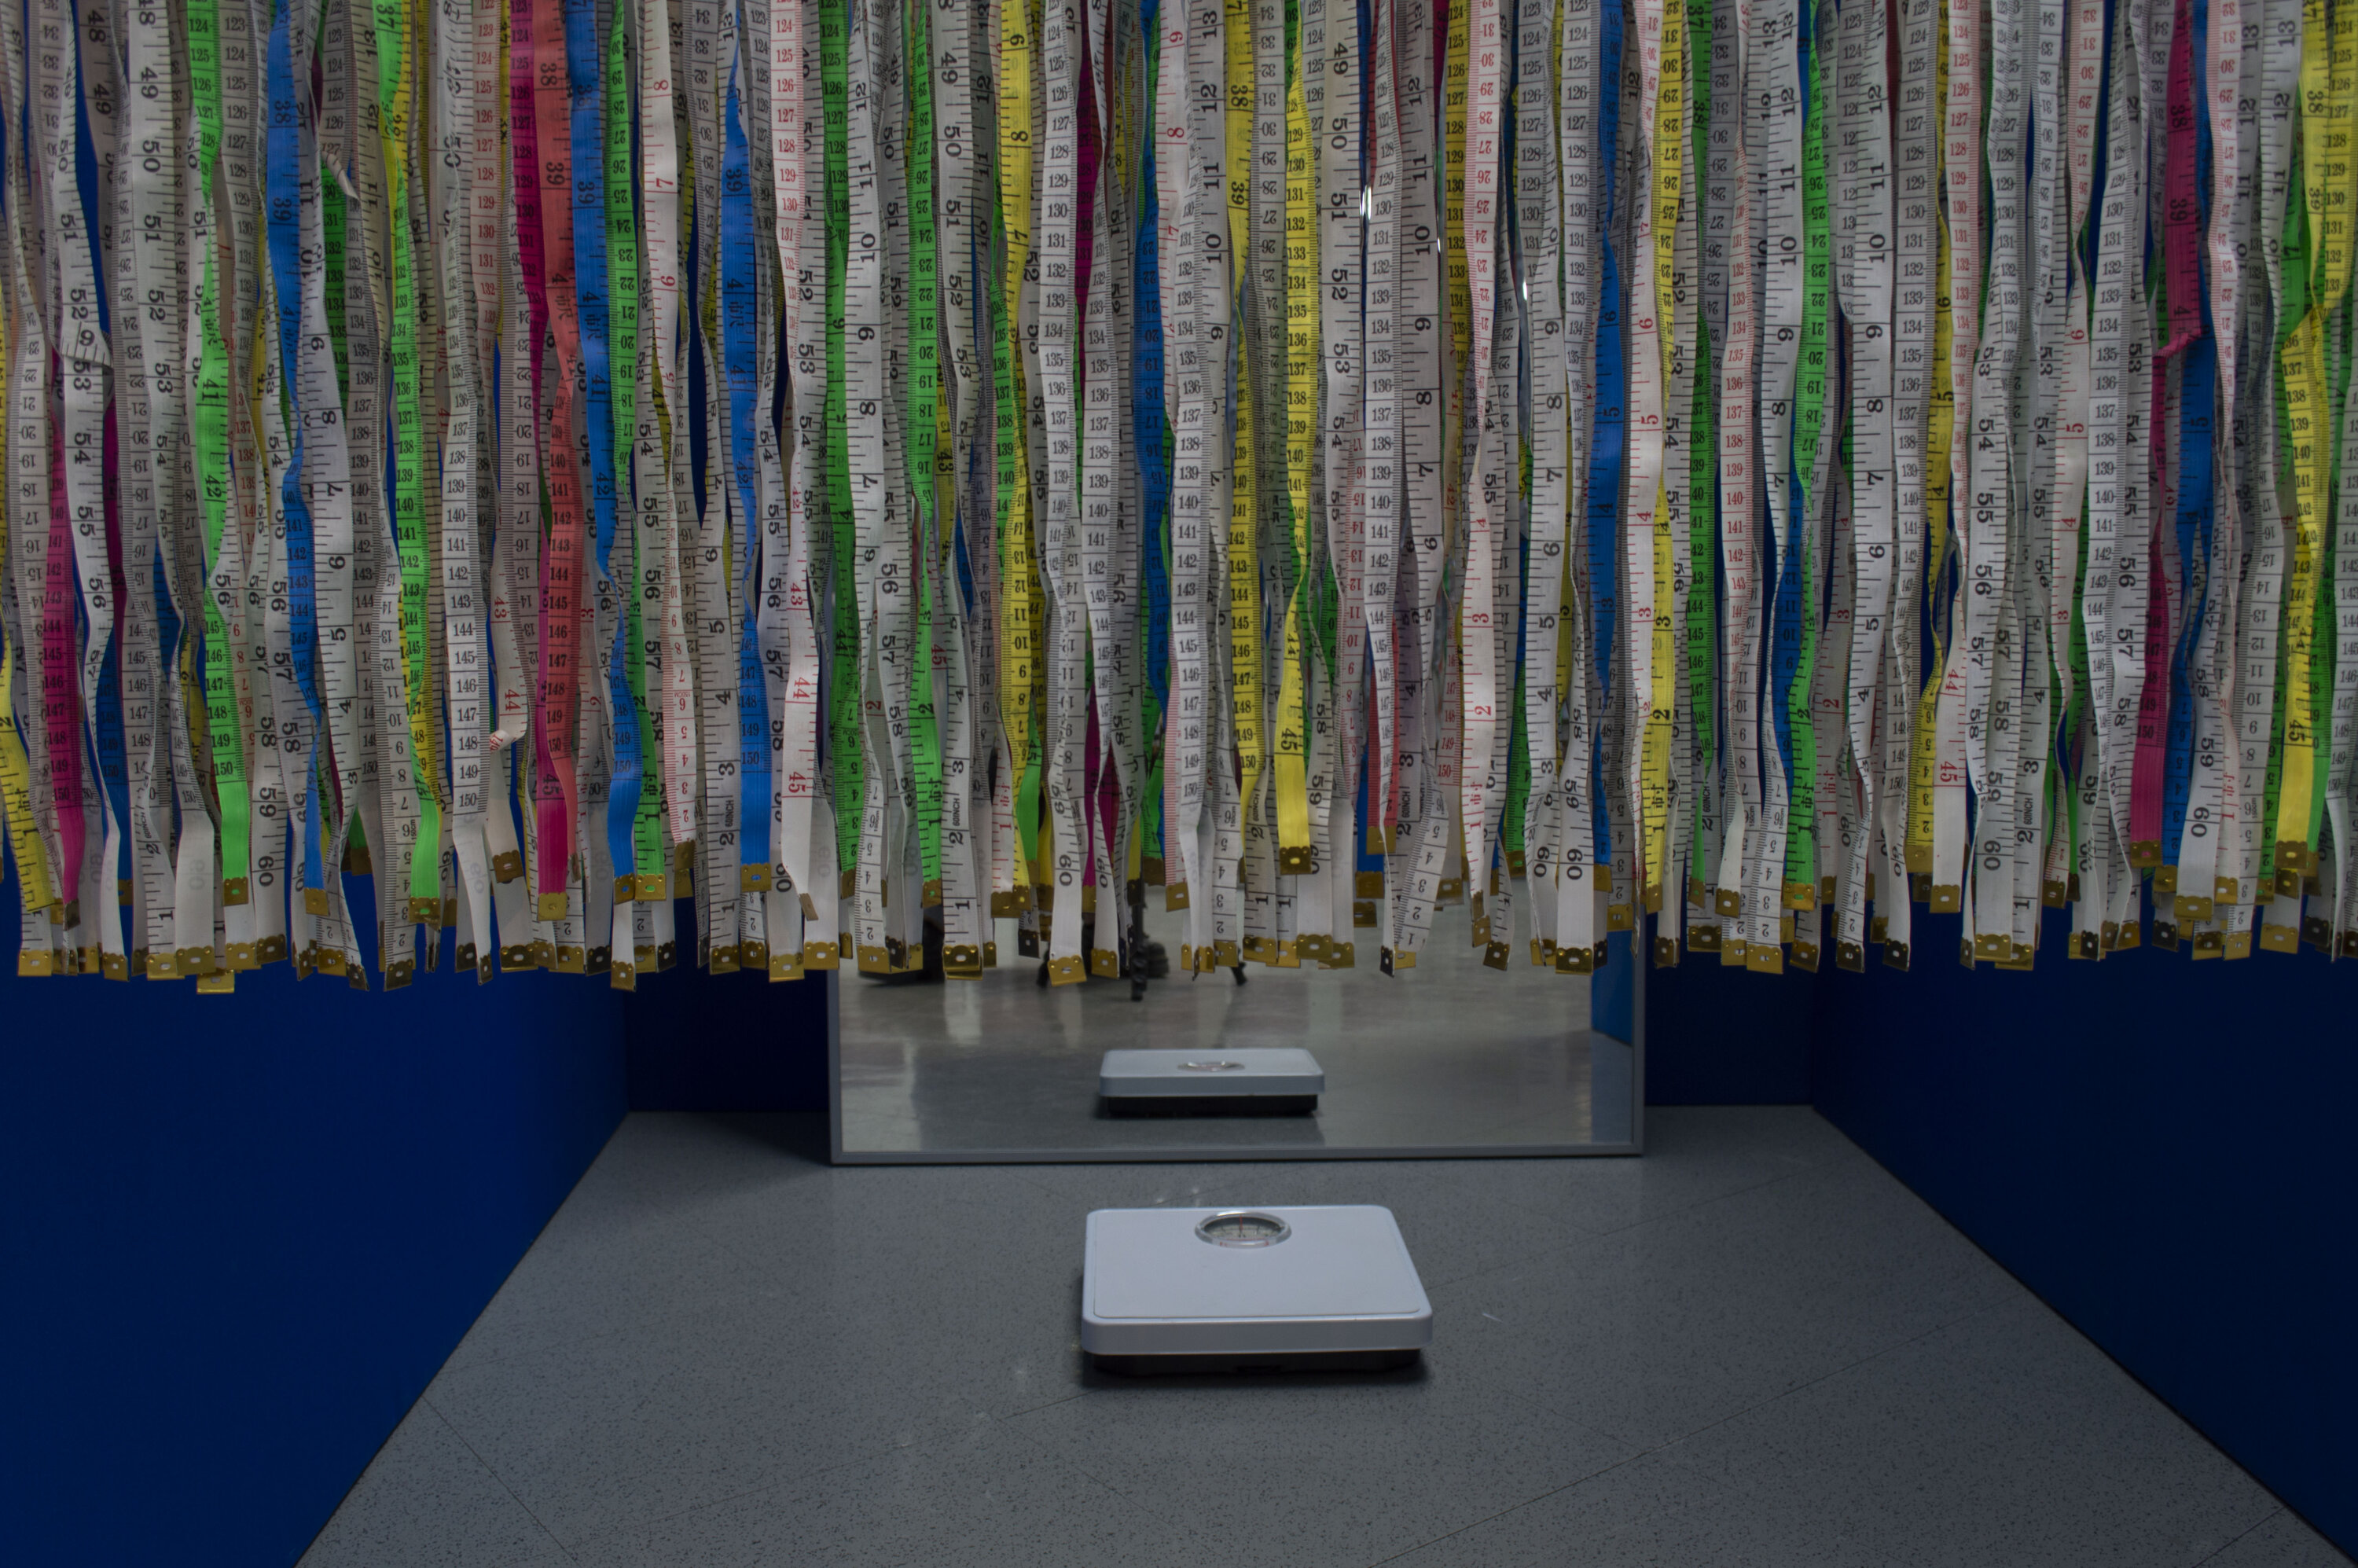 installation of measuring tapes hanging in front of a blue room. Inside room is a mirror and scale.